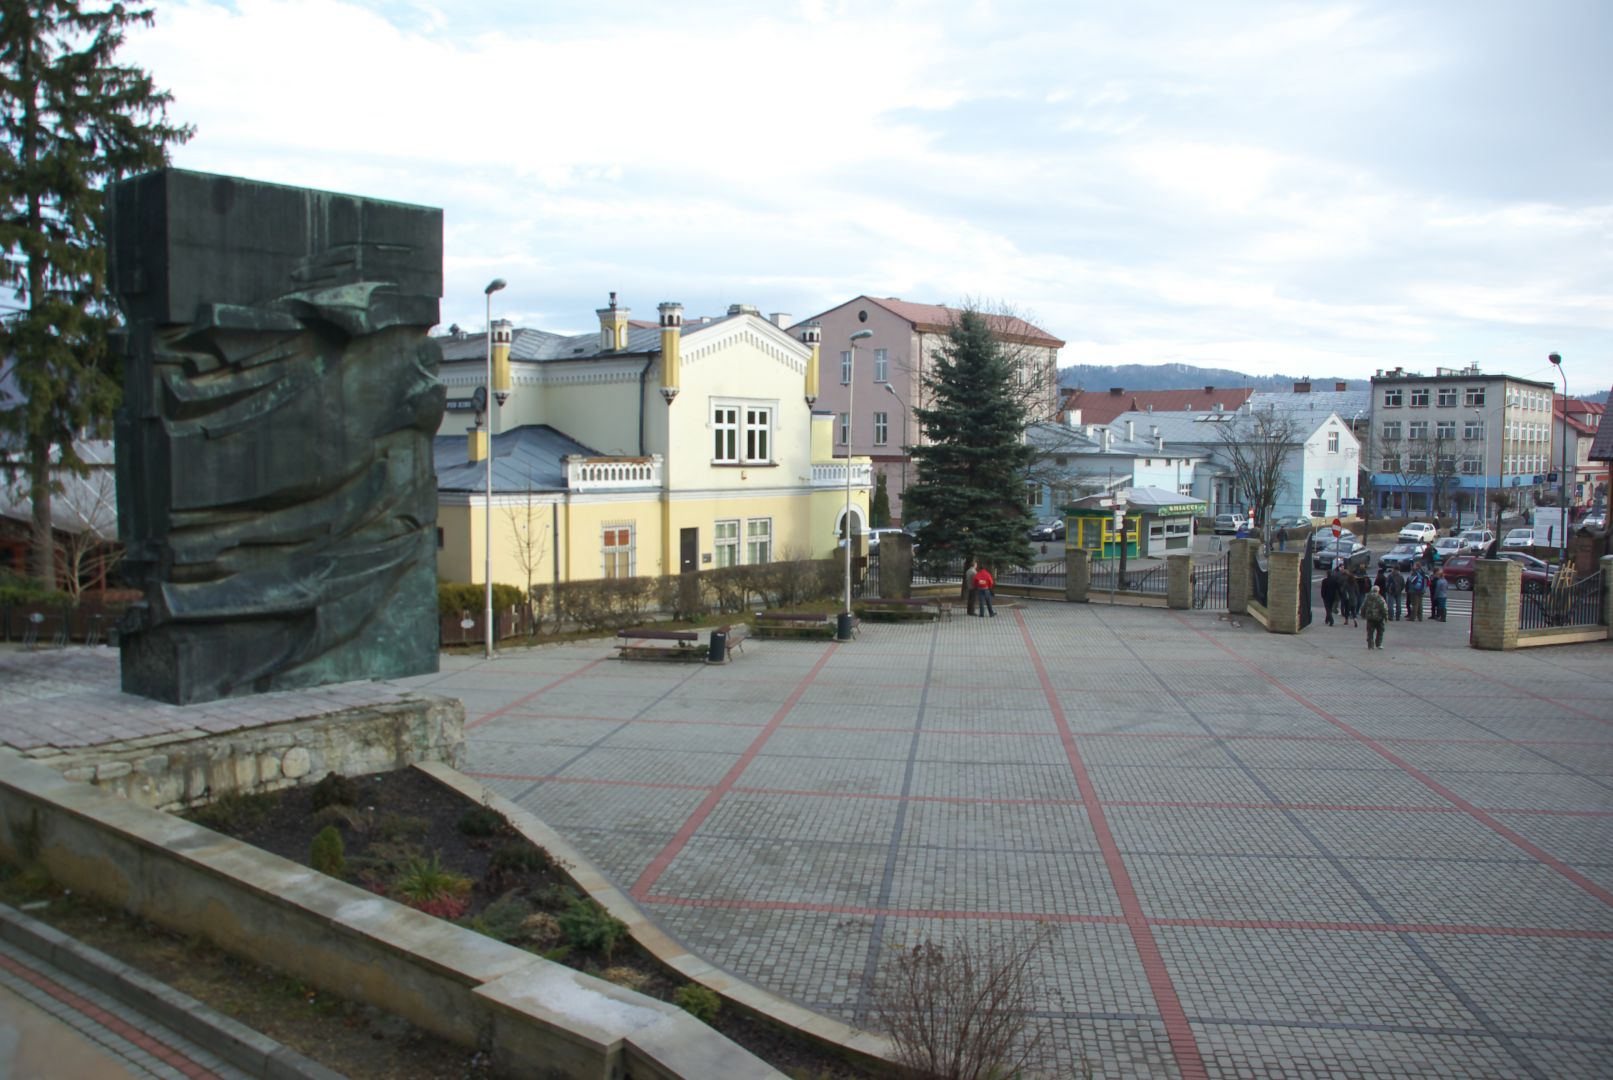 View of the square from the City Park